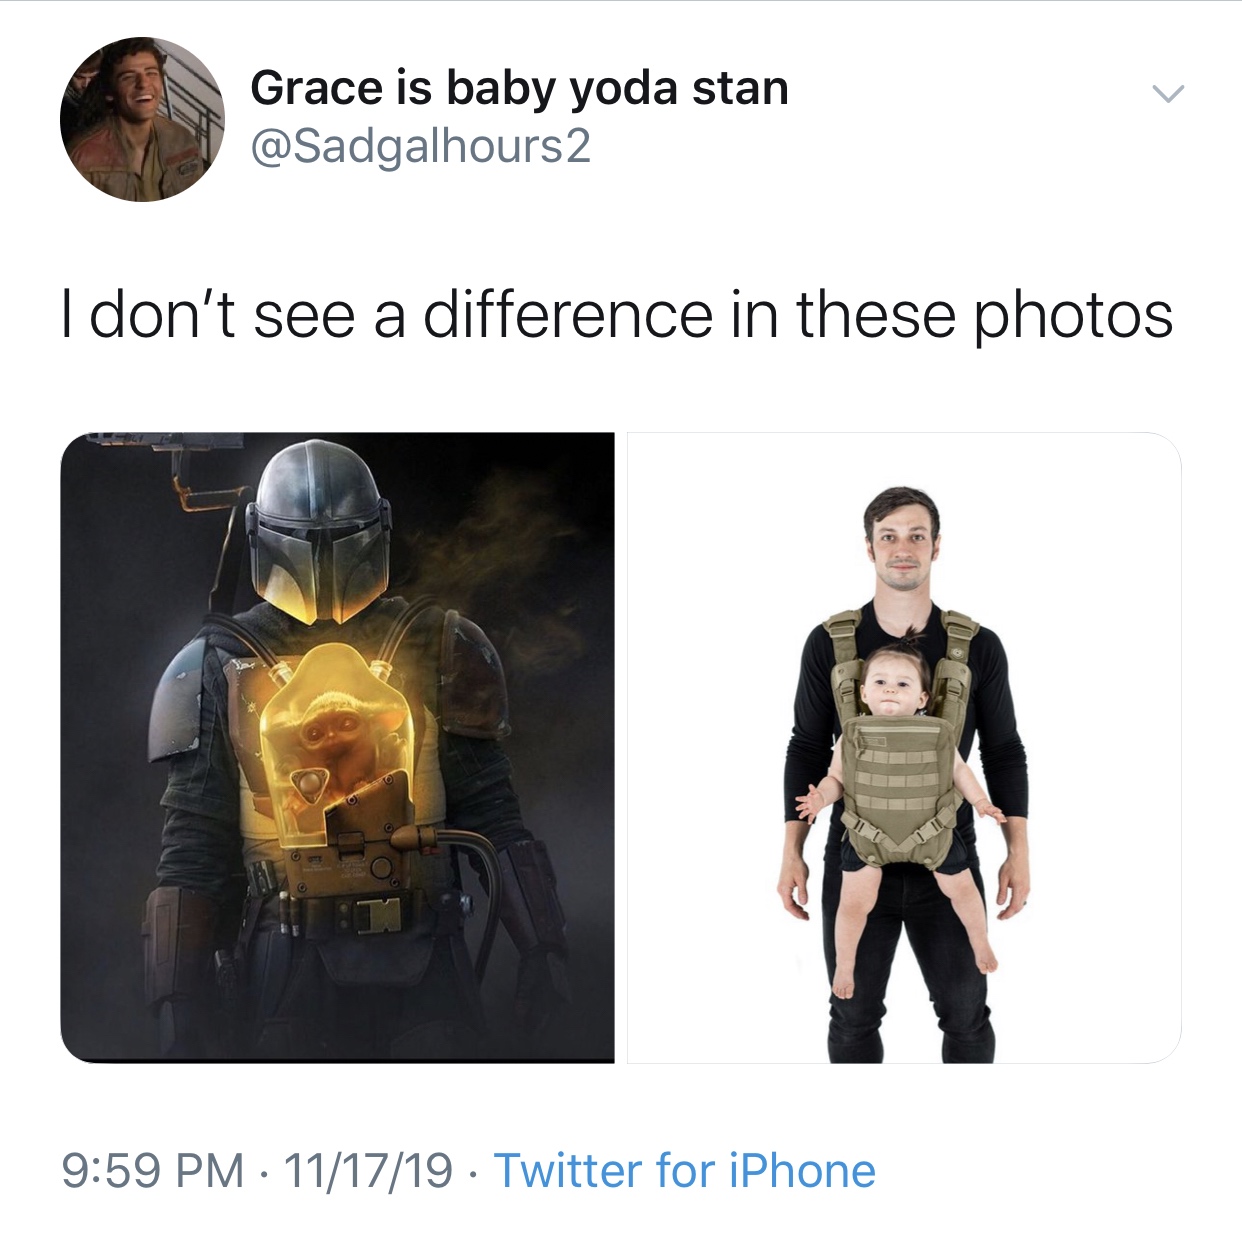 baby yoda meme - Grace is baby yoda stan I don't see a difference in these photos 111719 Twitter for iPhone